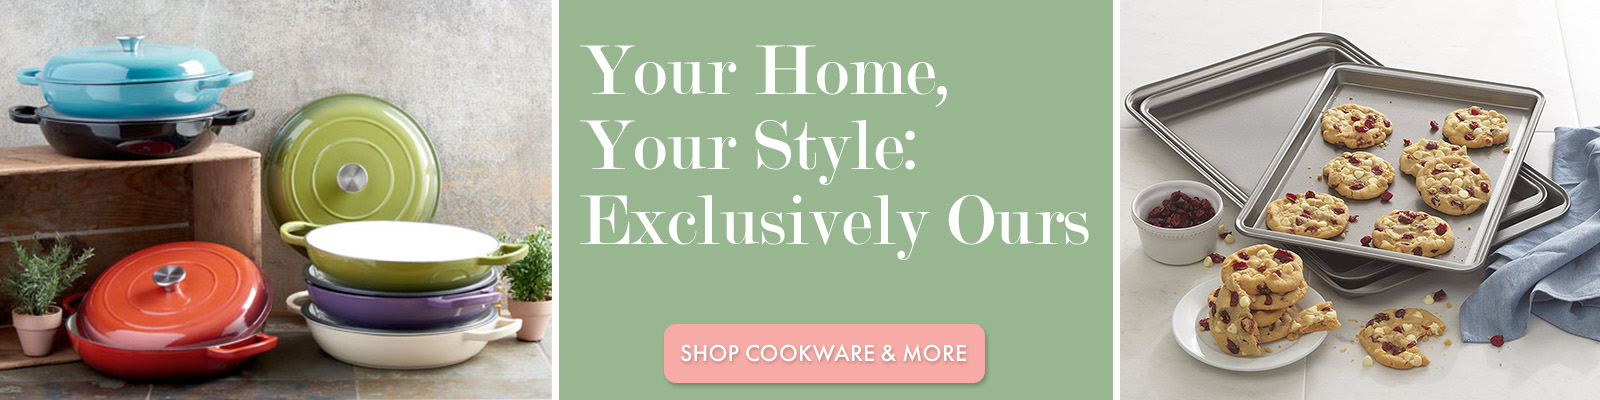 Your Home, Your Style: Exclusively Ours